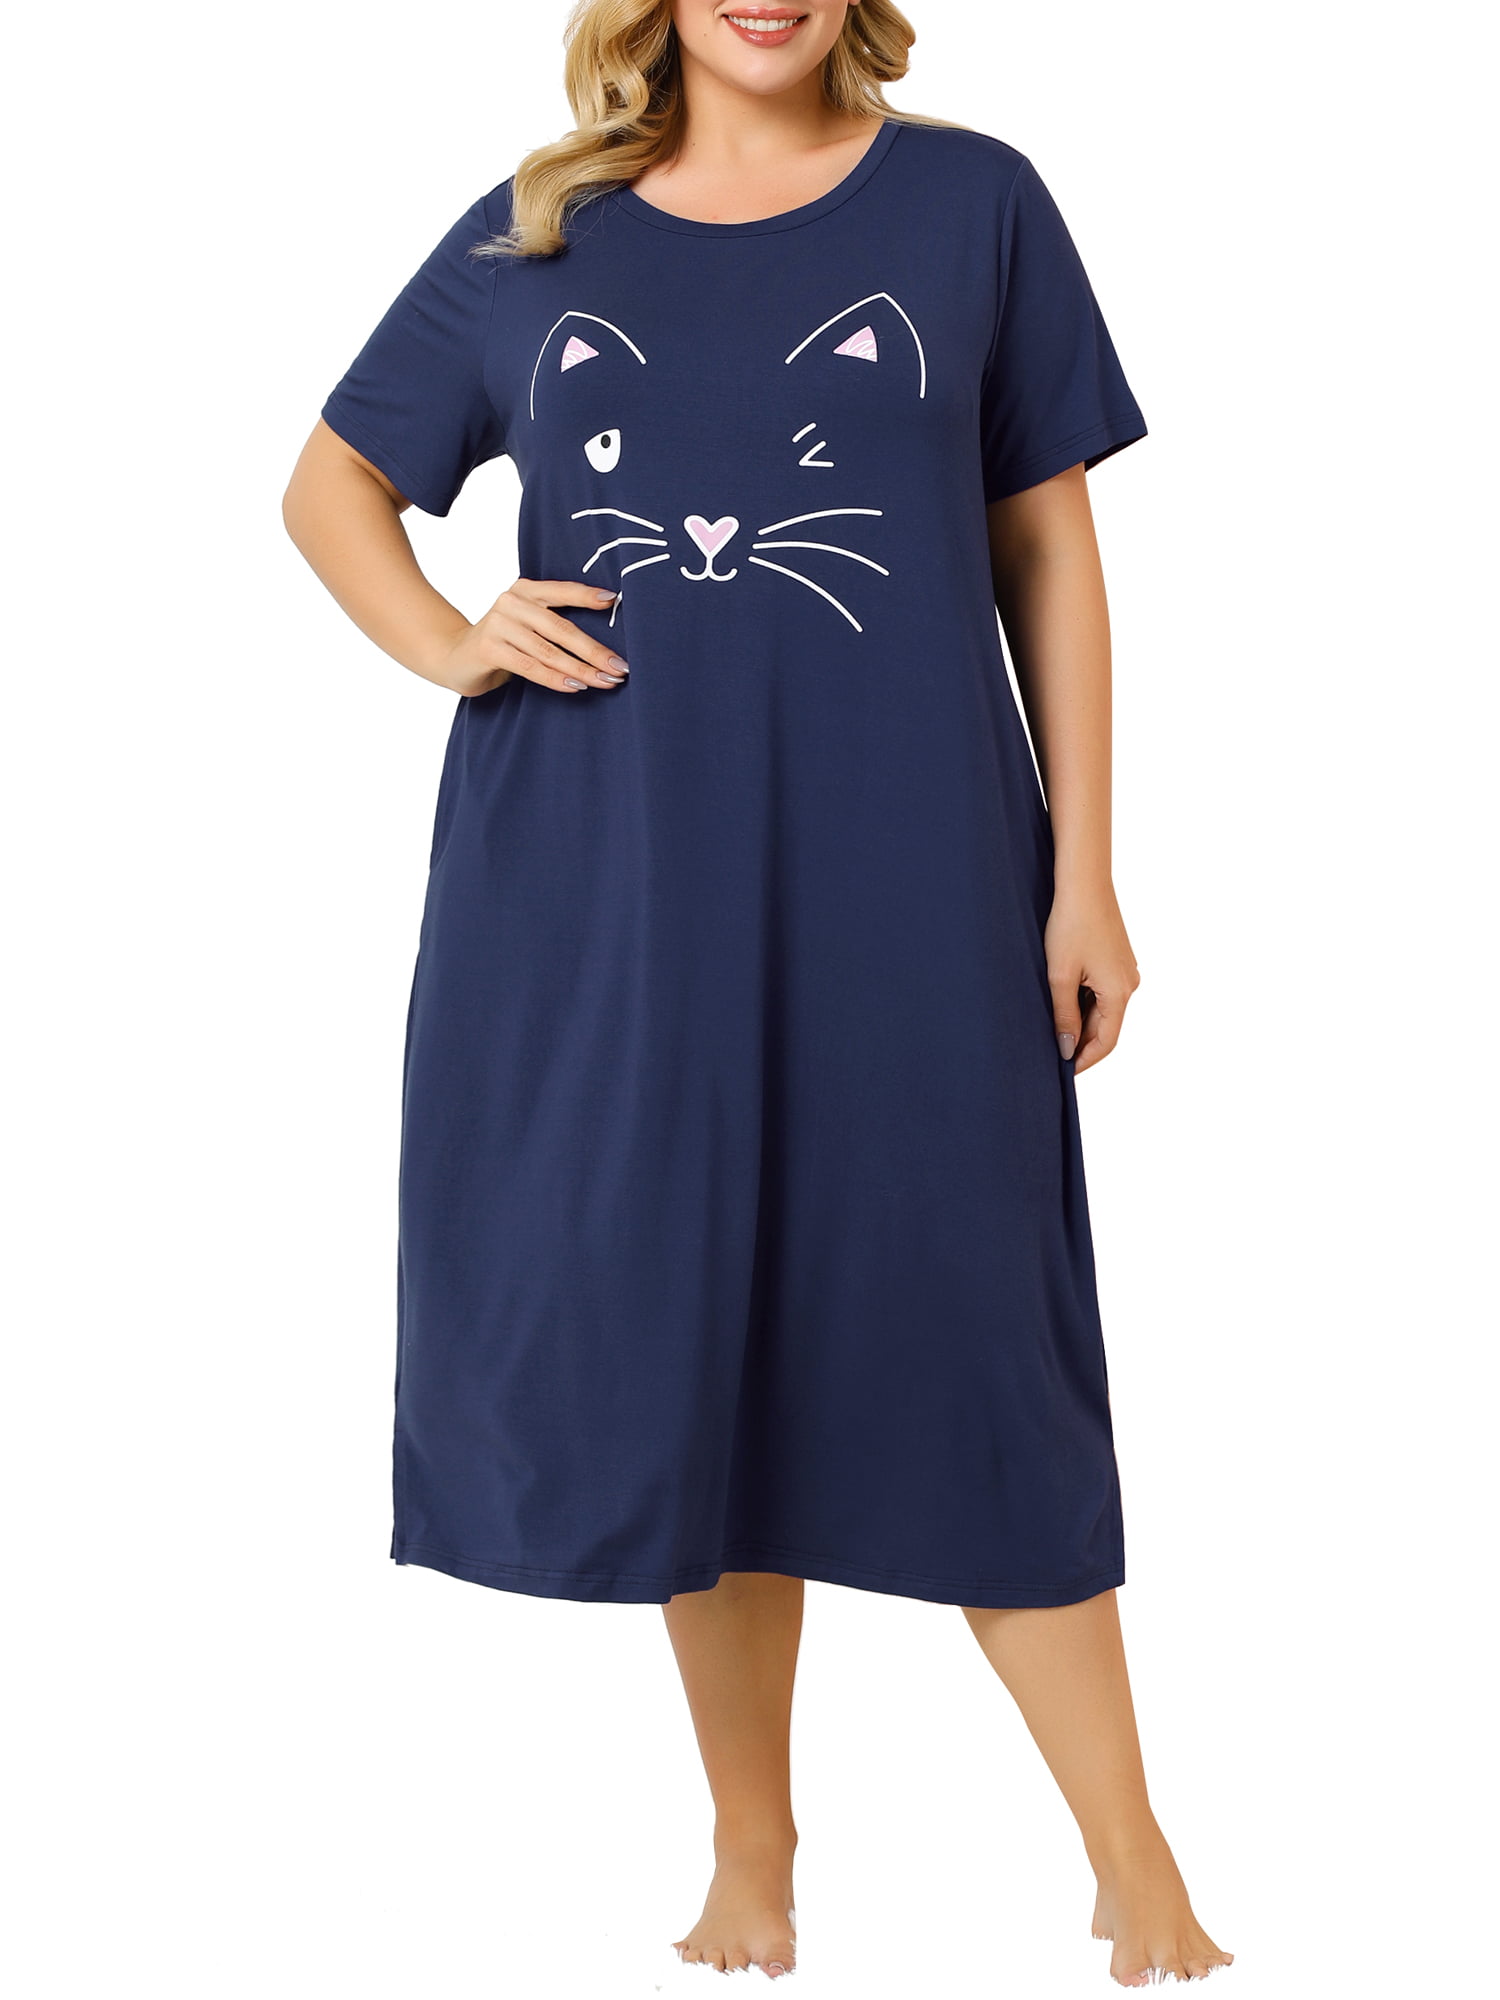  VREWARE plus size women winter,cheap nightgowns for women,cheap  stuff under 50 cents,best of seller womens clothing,cheap clothes for  women,delivery costume,dollar store : Clothing, Shoes & Jewelry